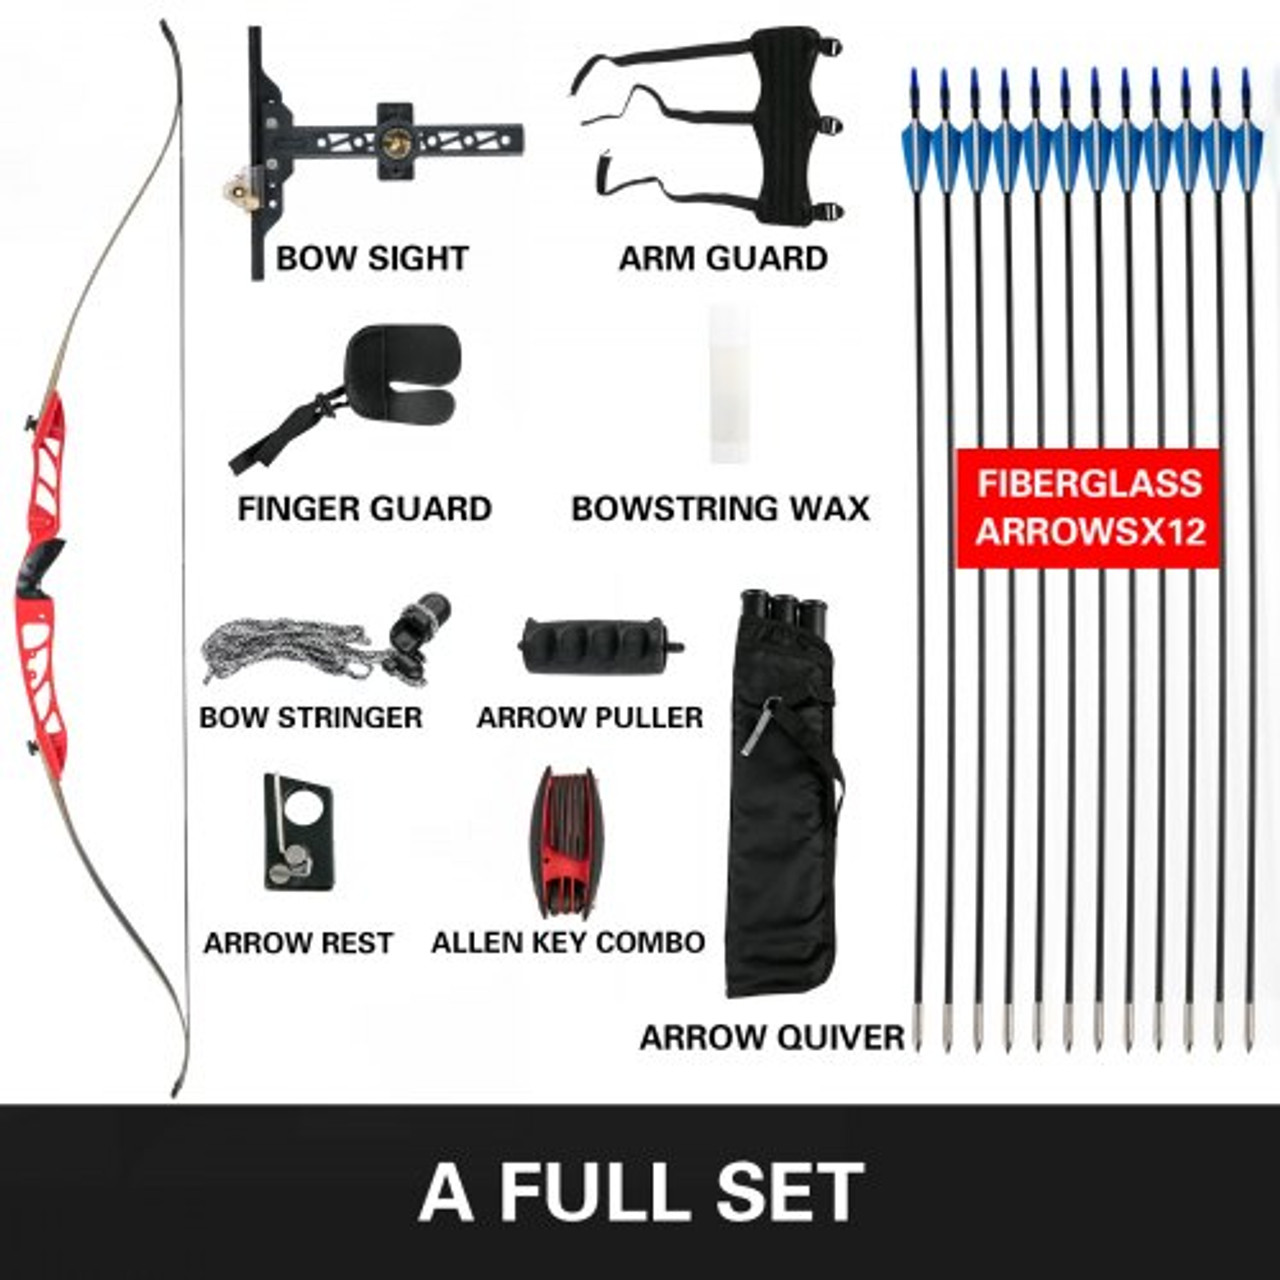 Recurve Bow Set 38lbs Archery Bow Aluminum Alloy Takedown Recurve Bow Right Hand Bow And Arrow Takedown Bow Archery Set Bow And Arrow For Adults Youth Hunting Shooting Practice Competition